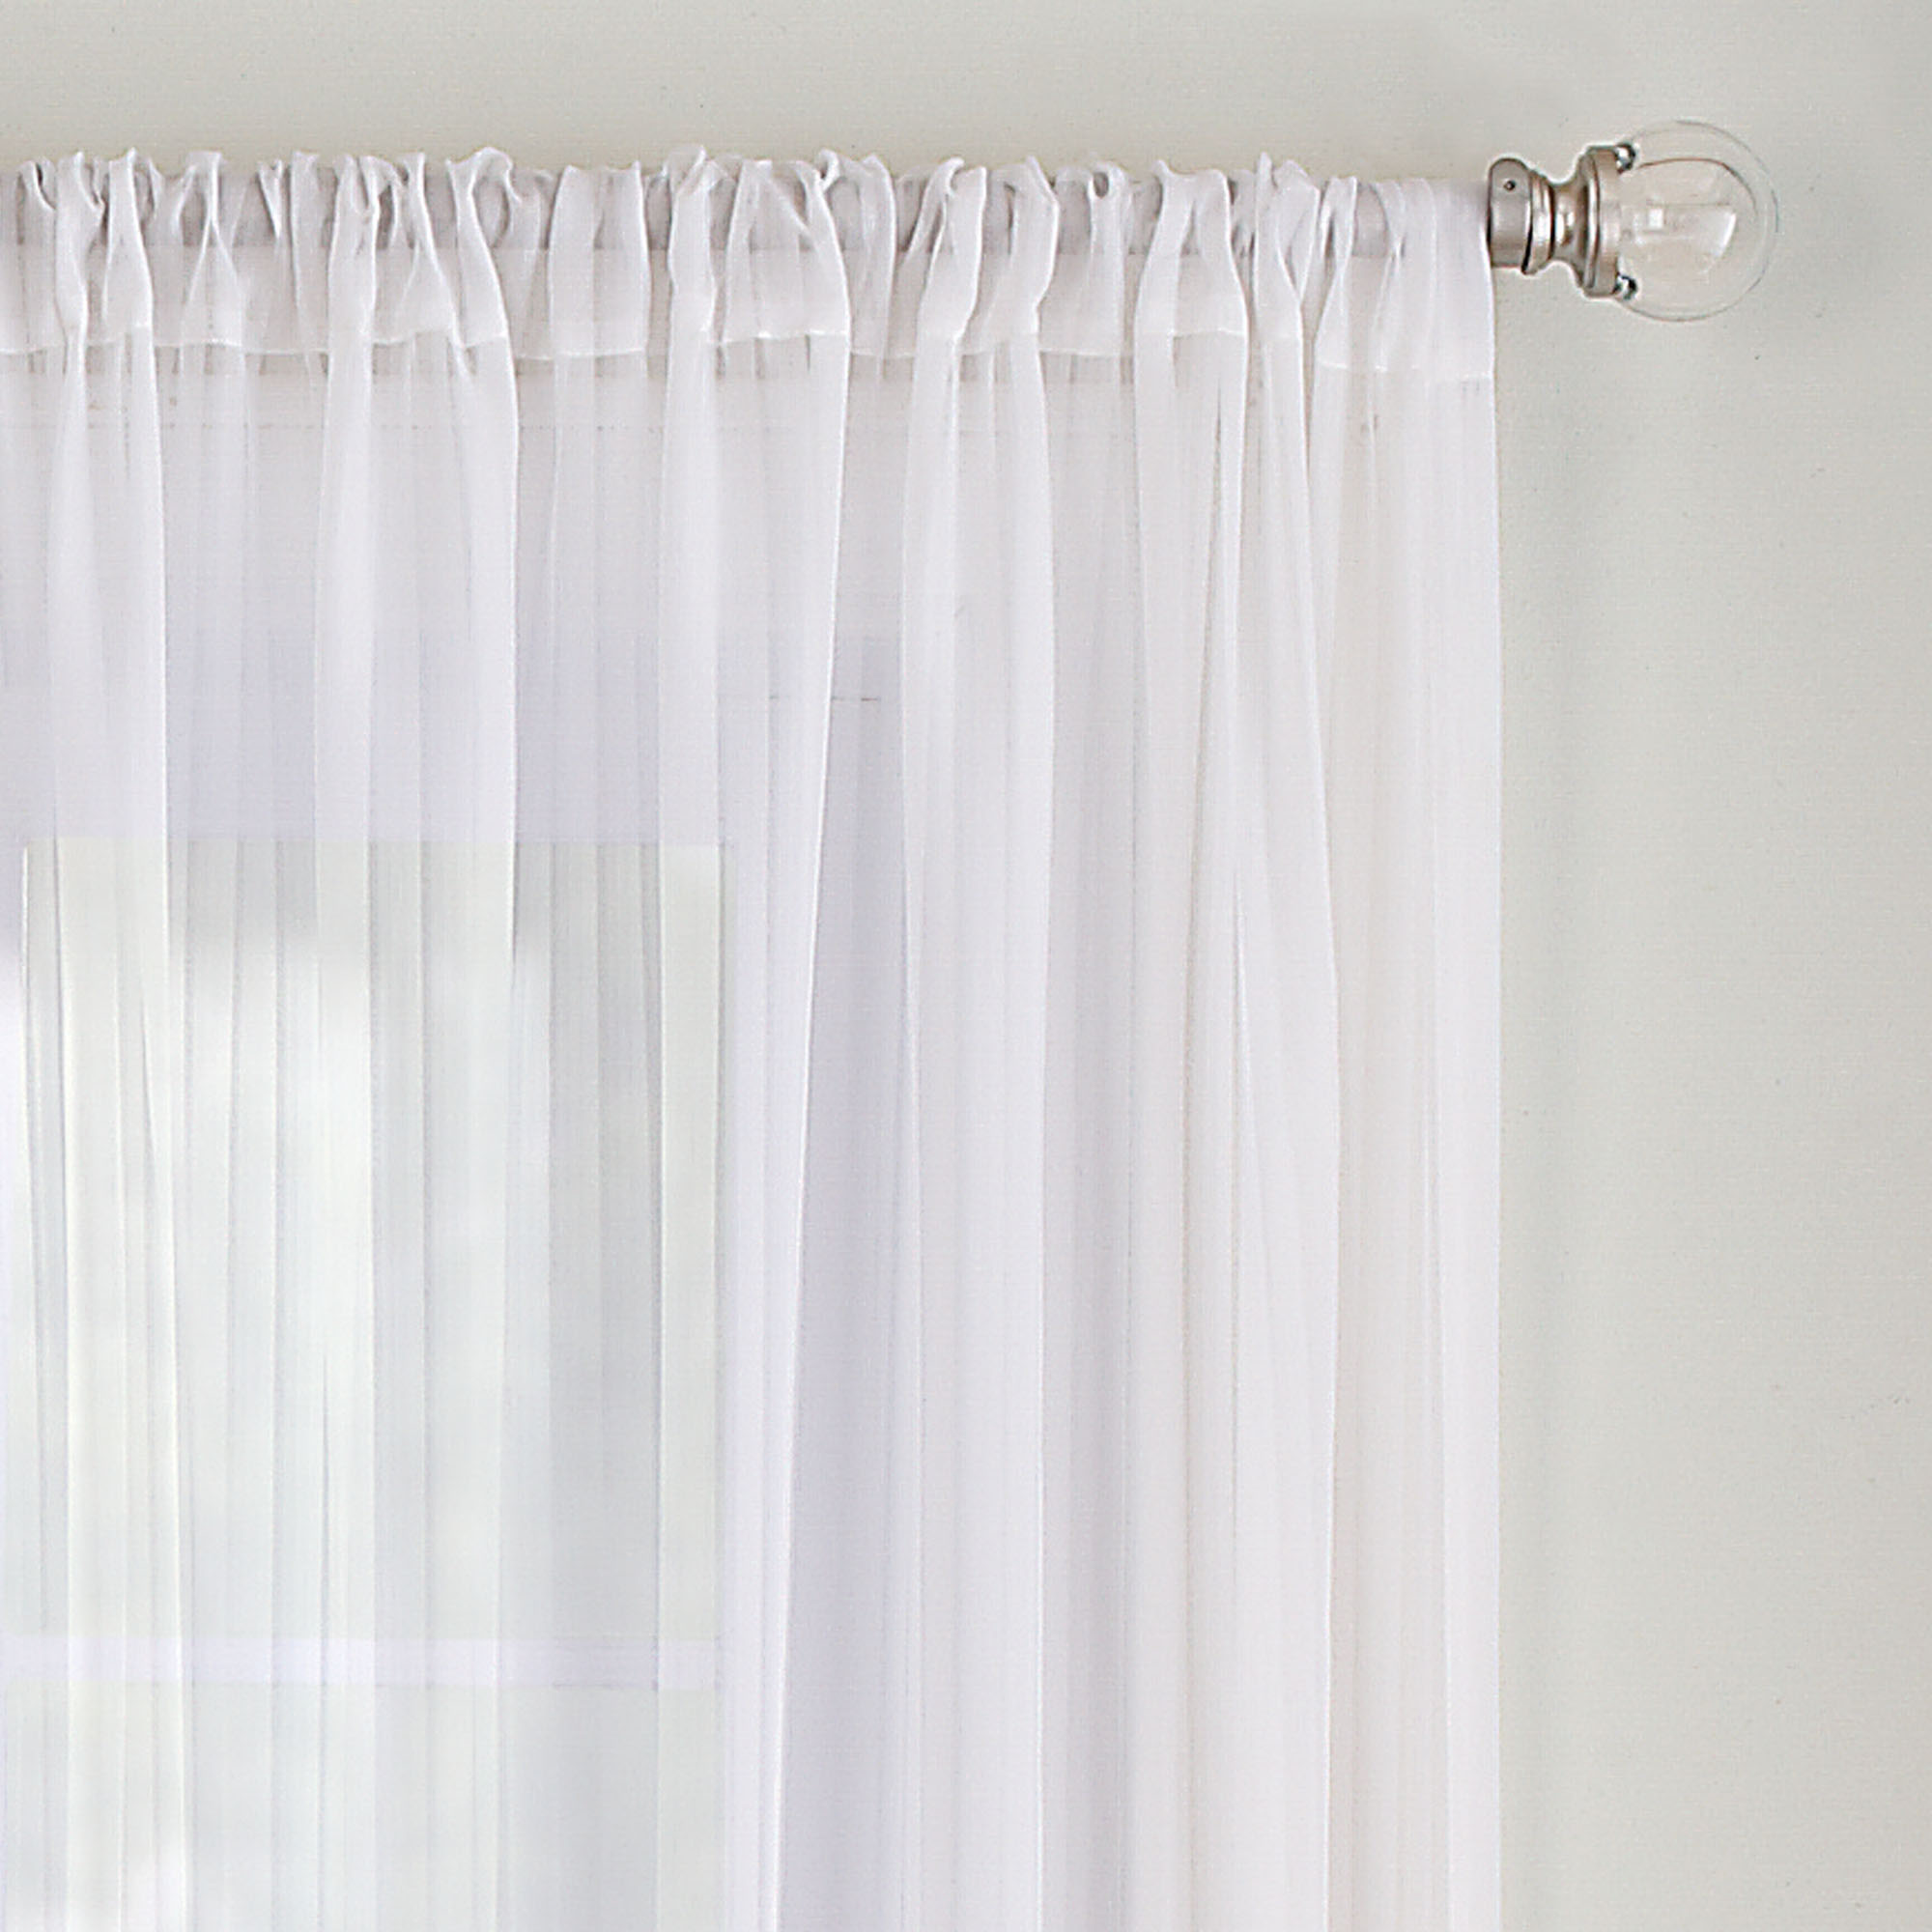 Better Homes & Gardens Solid Print Rod Pocket Sheer Curtain Panel, 52" x 63", Tan and White - image 4 of 5